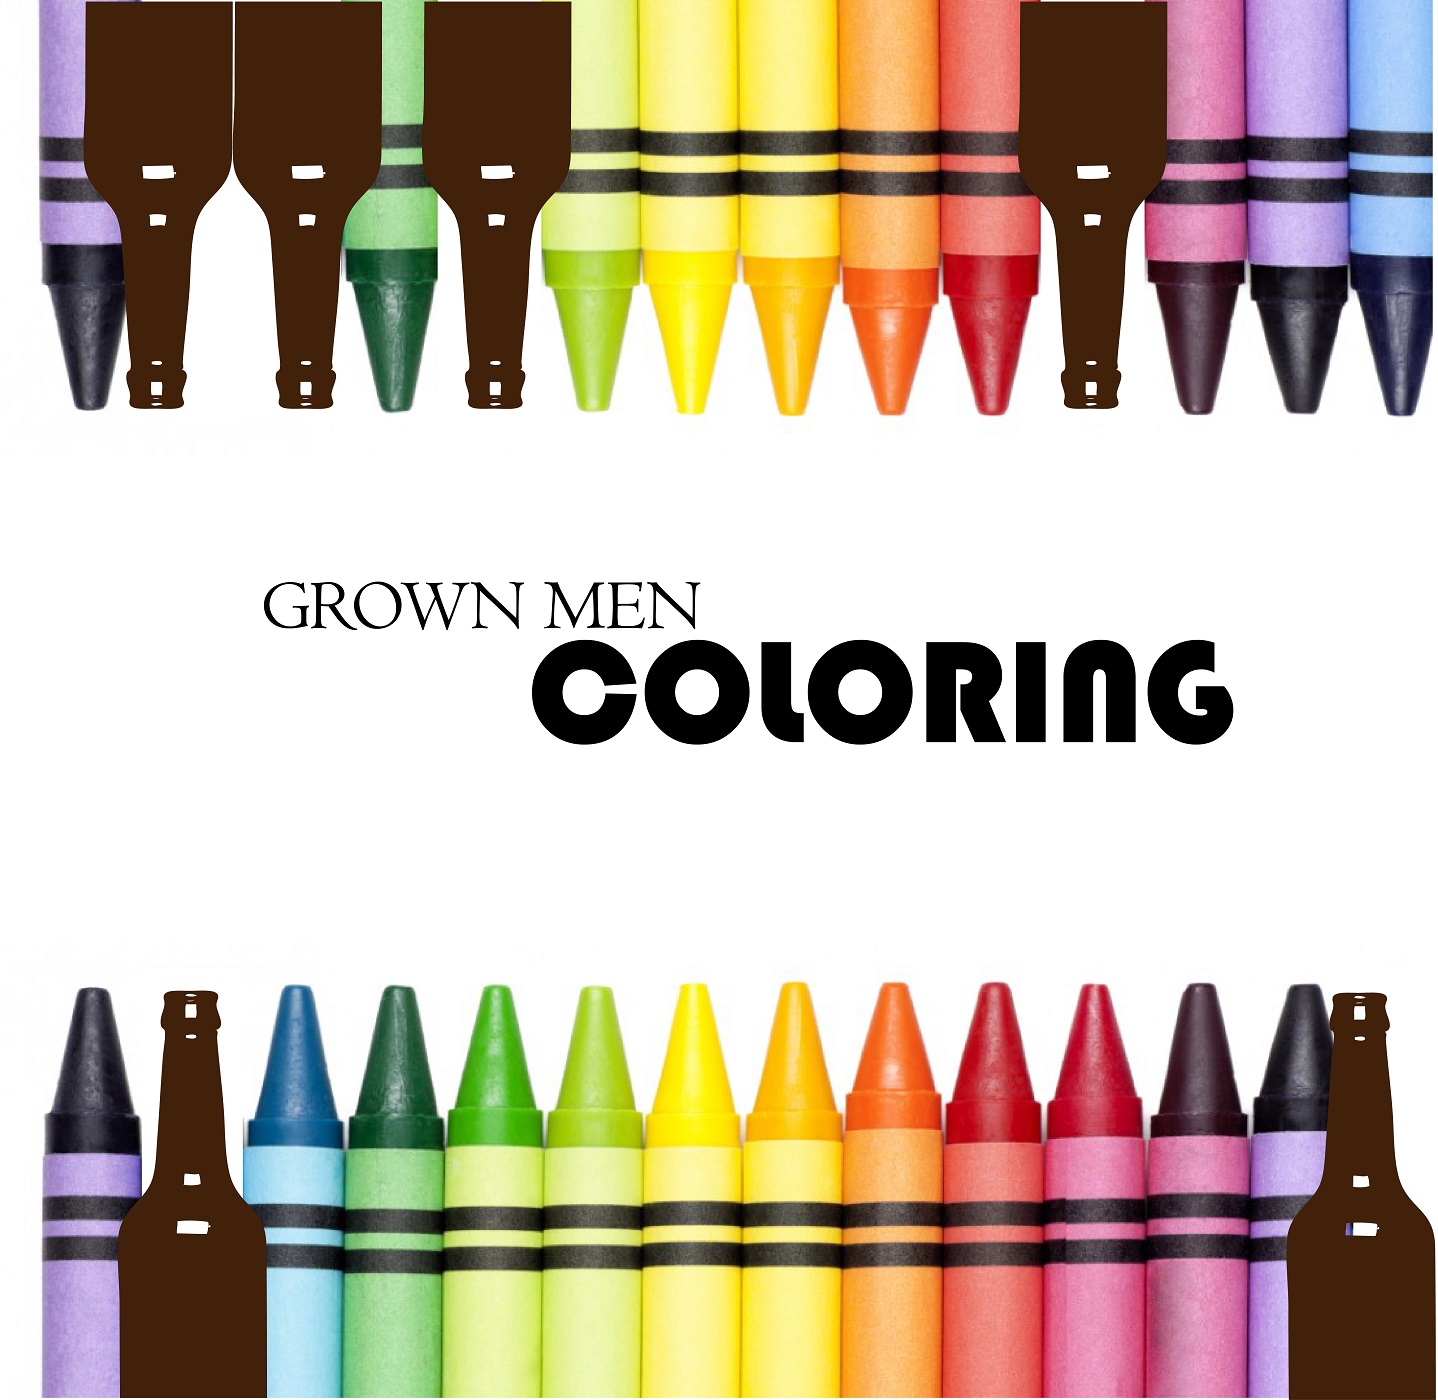 Grown Men Colouring - 037 - The Podcast aboot other Podcasts